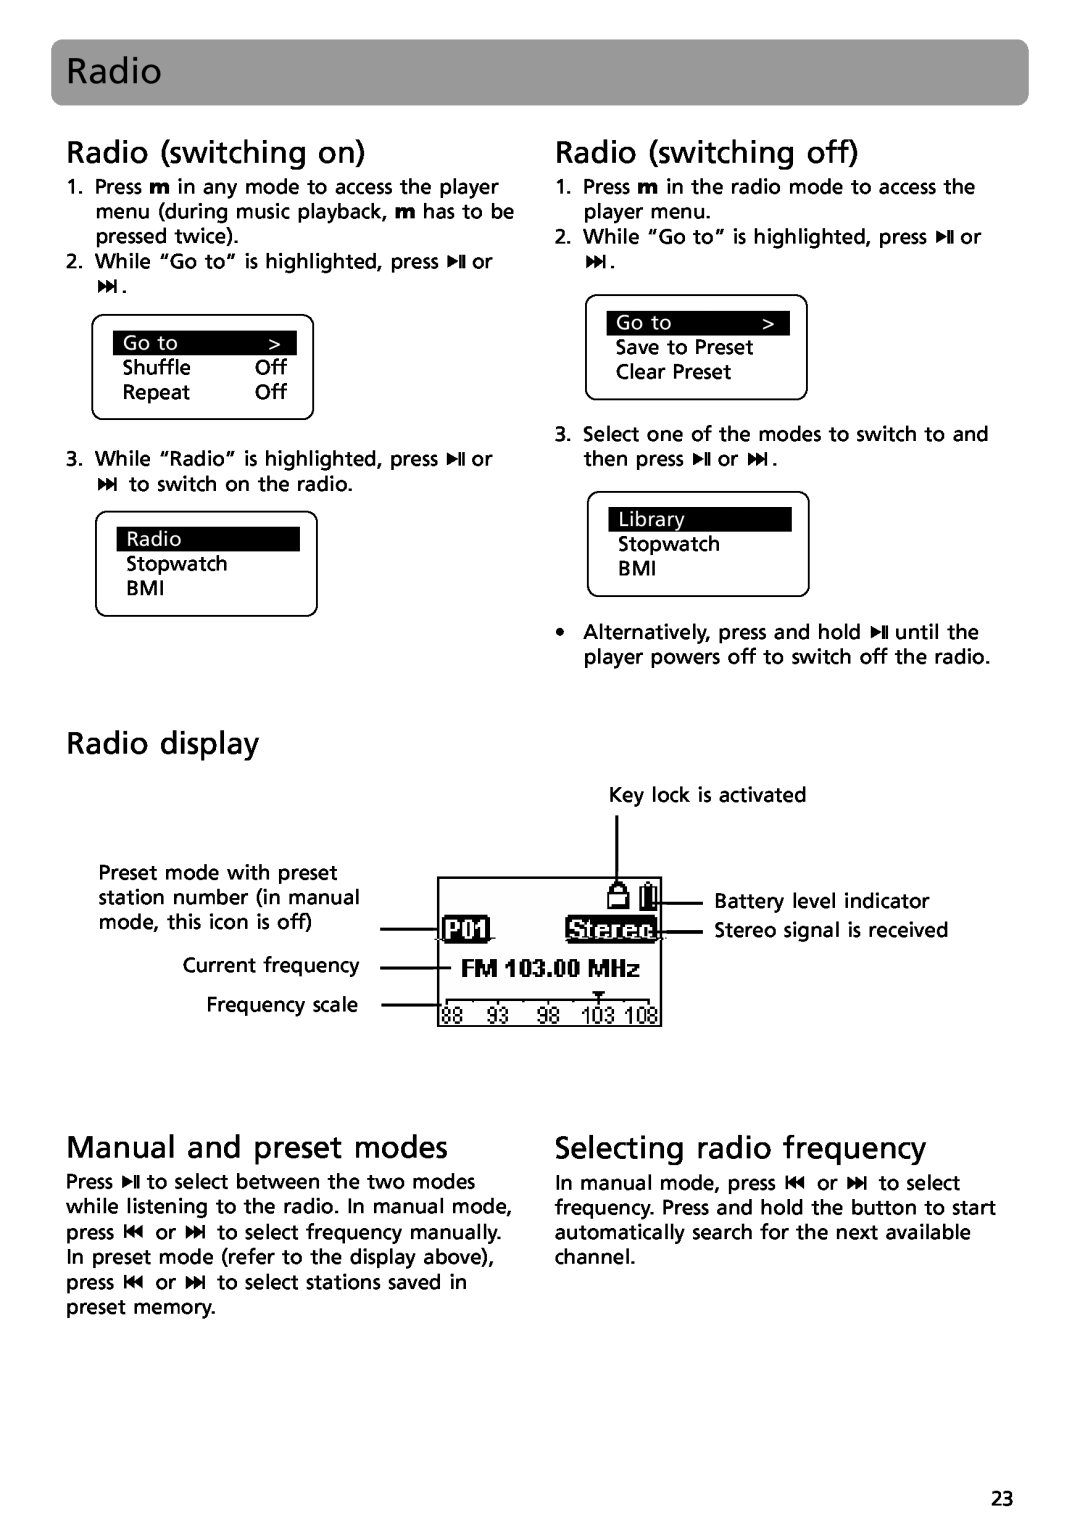 RCA S2001 Radio switching on, Radio switching off, Radio display, Manual and preset modes, Selecting radio frequency 